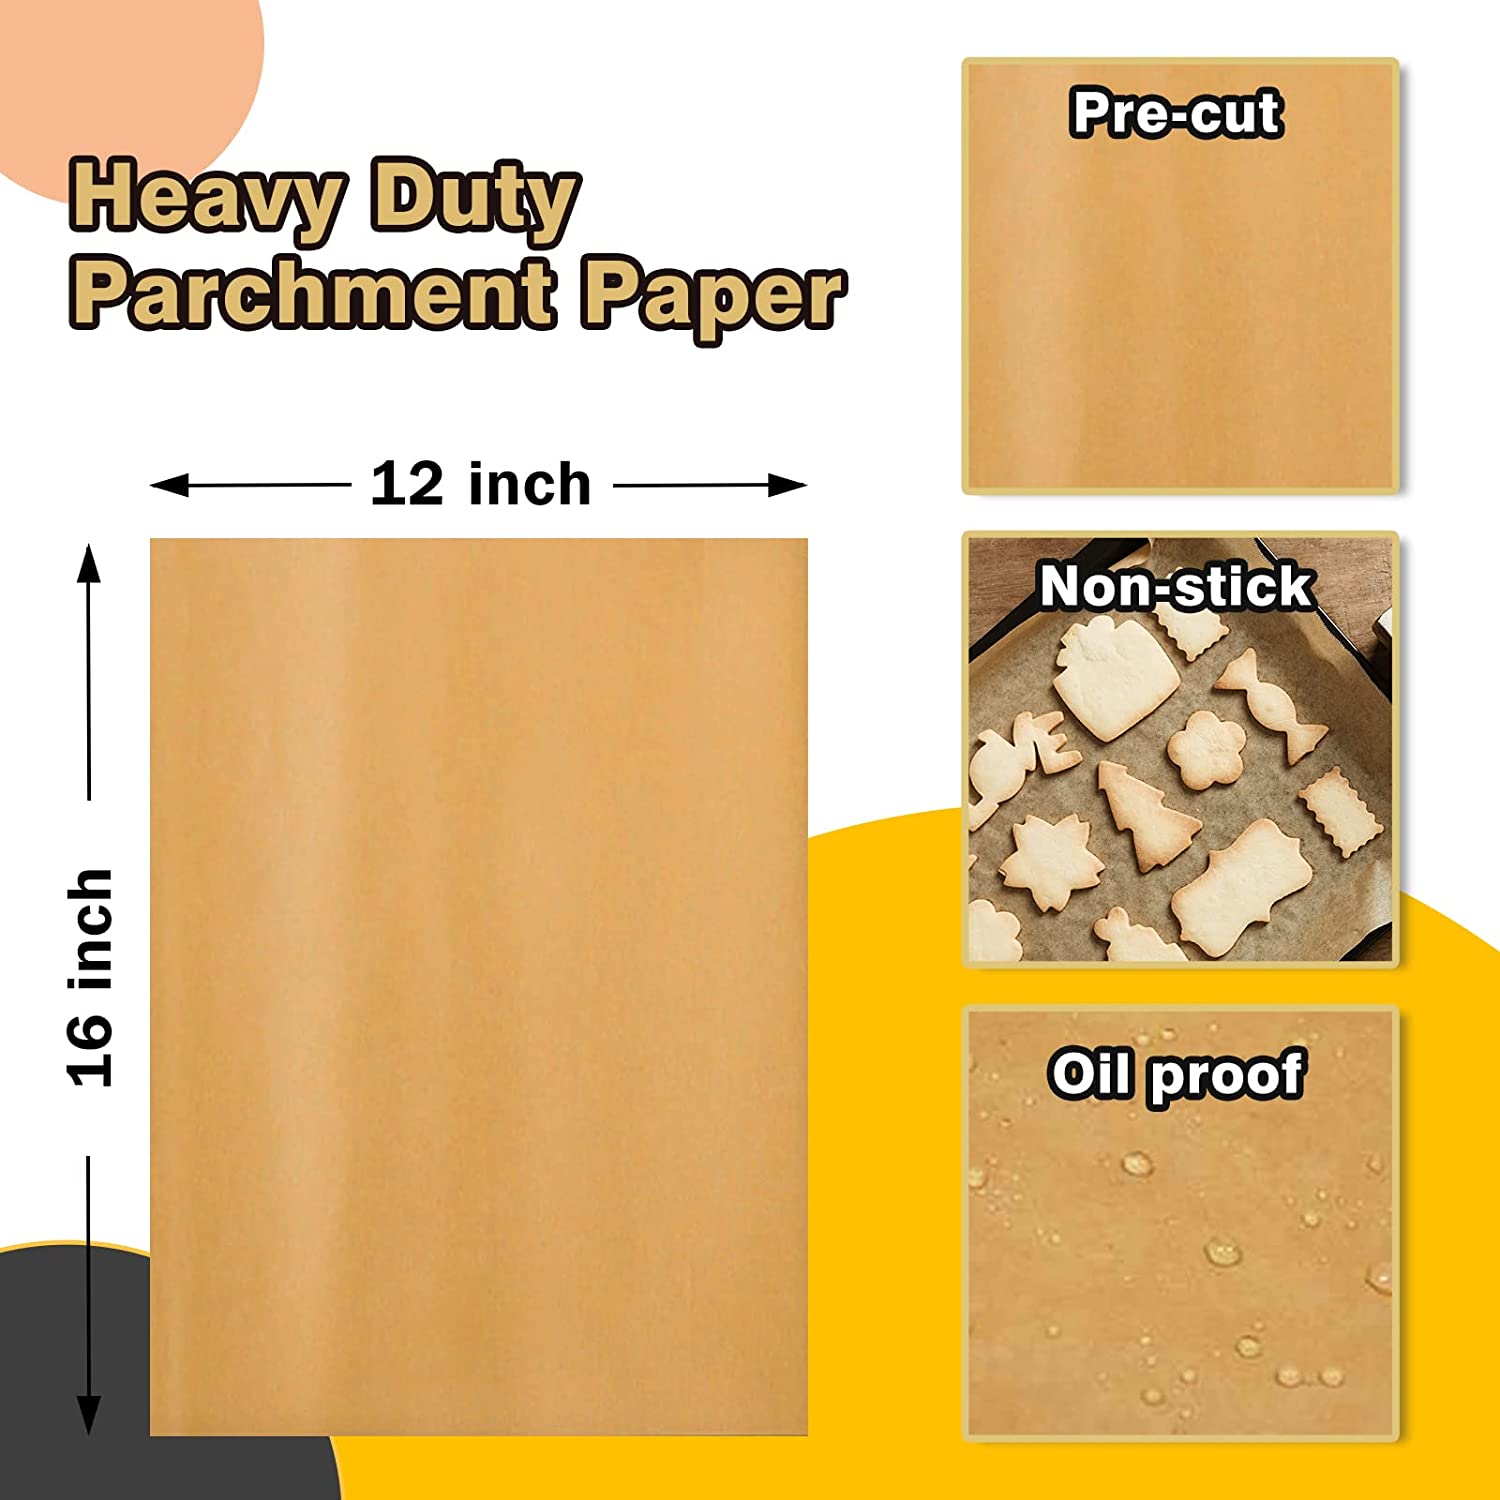 Katbite Heavy Duty Parchment Paper Roll for Baking, 12 in x 262 ft Non-Stick Baking Paper for Cooking, Baking Cookies, Grilling, Air Fryer and Steamin